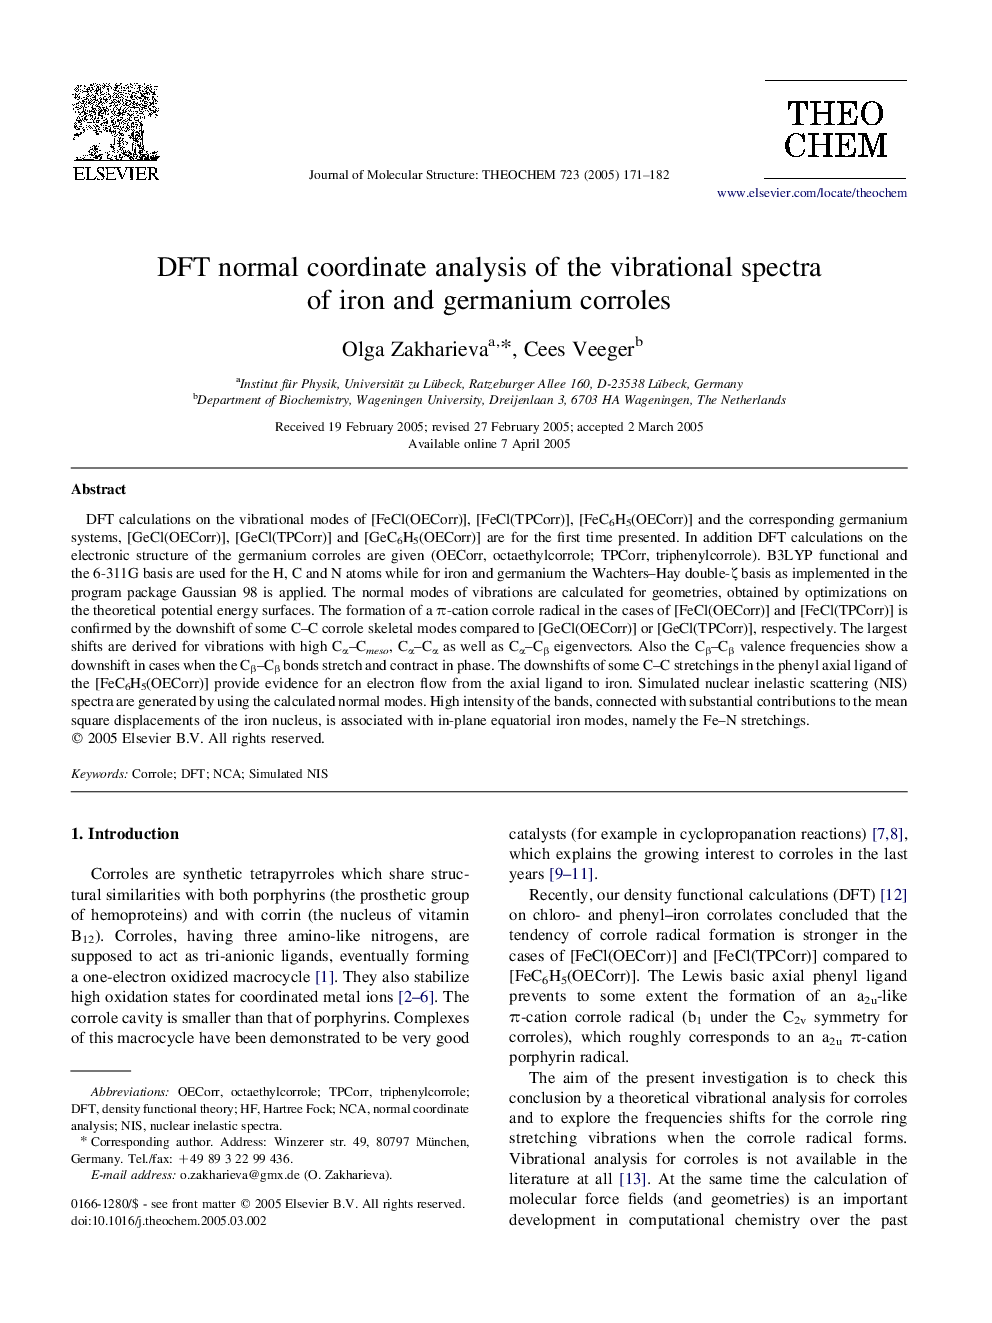 DFT normal coordinate analysis of the vibrational spectra of iron and germanium corroles